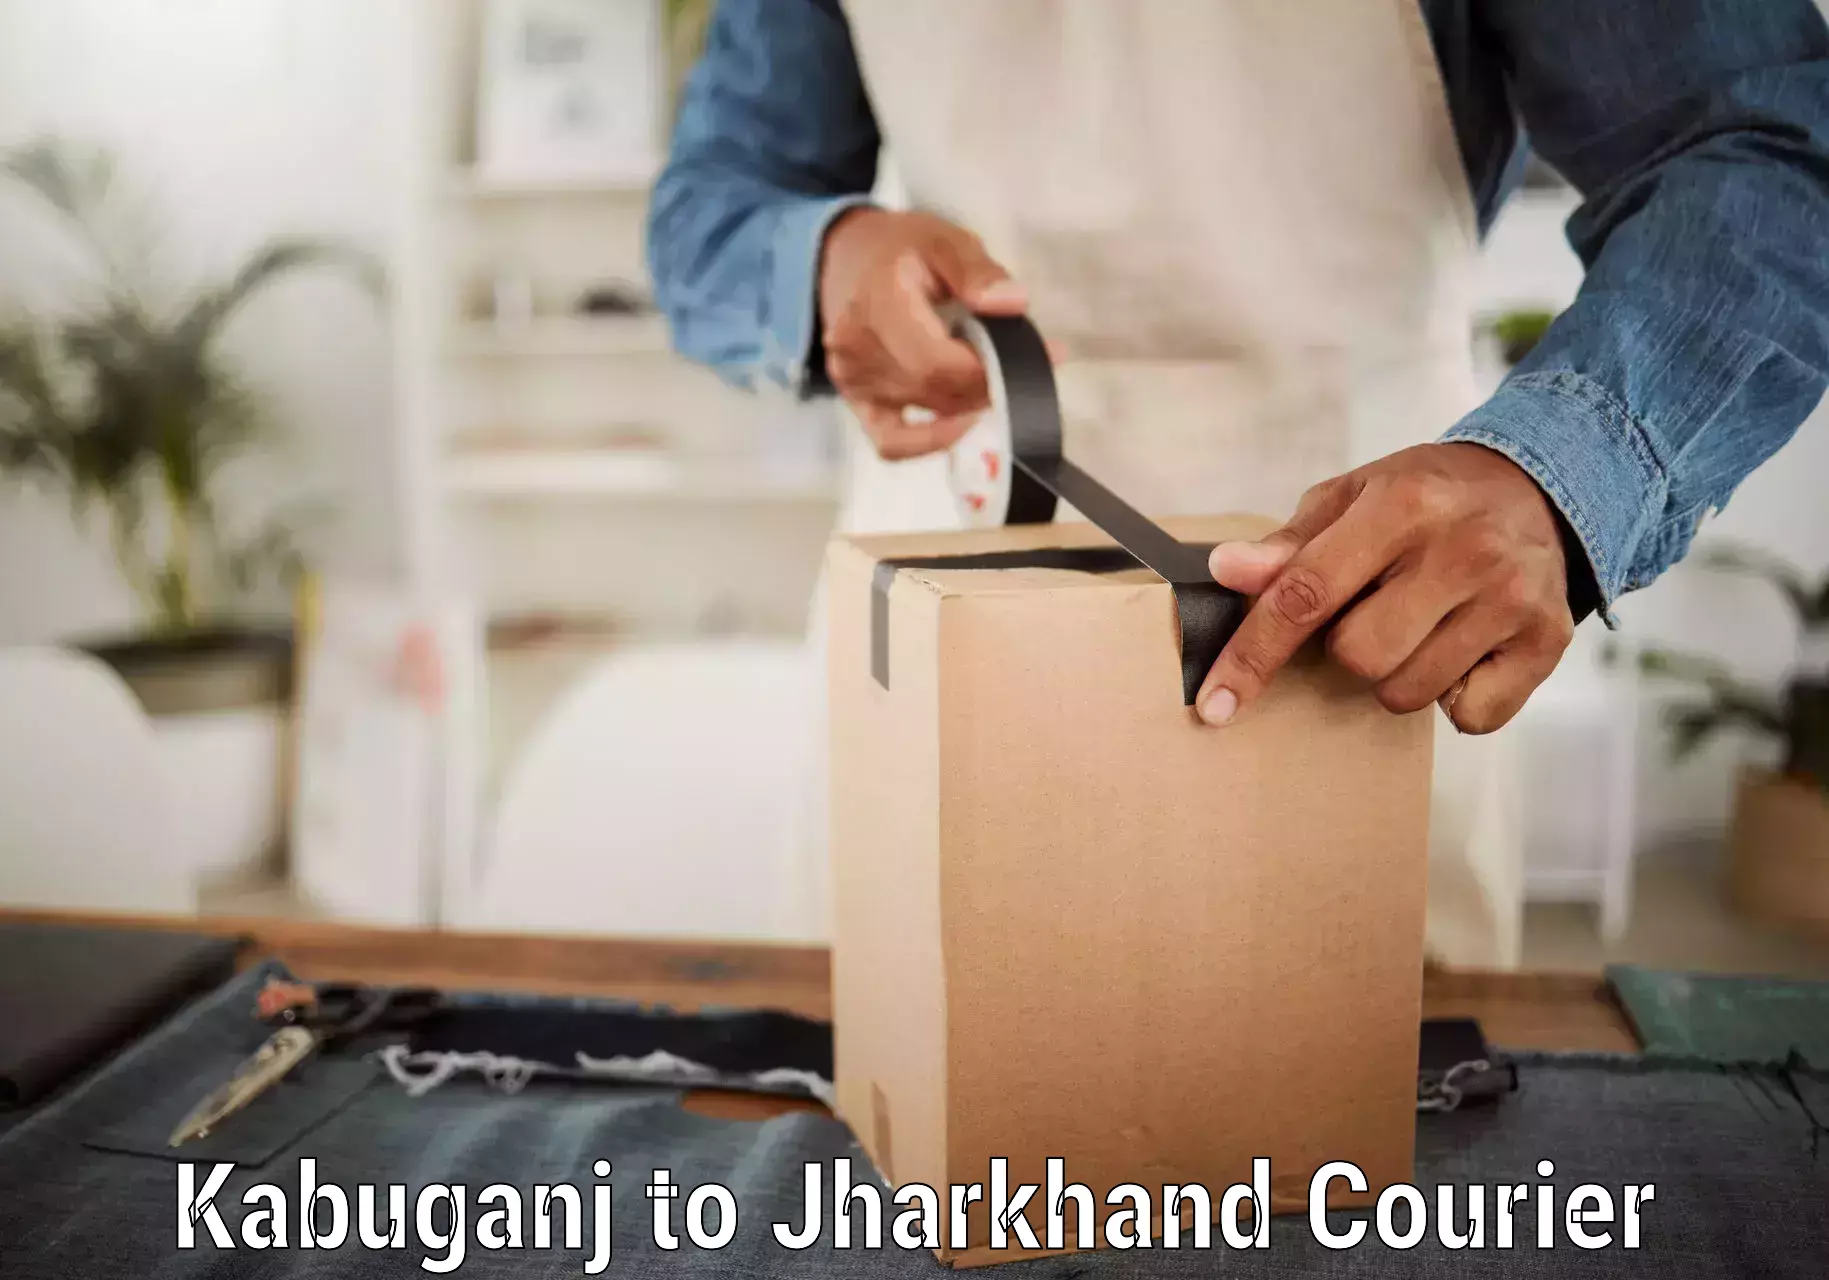 Quality courier services Kabuganj to Hazaribagh